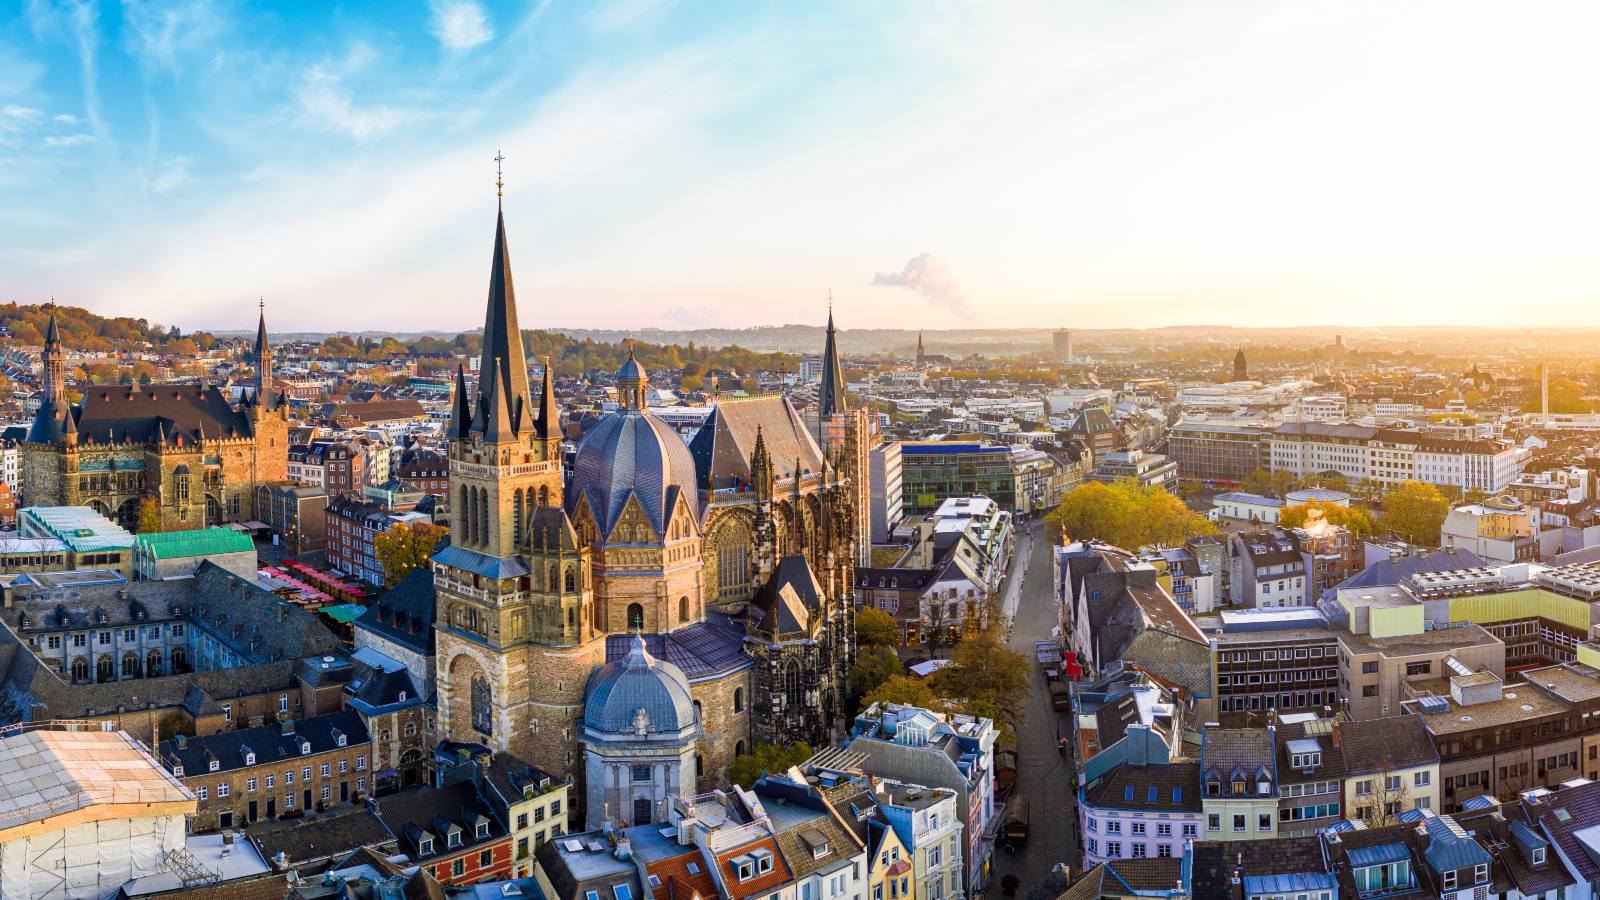 Panoramic view of Aachen, Germany